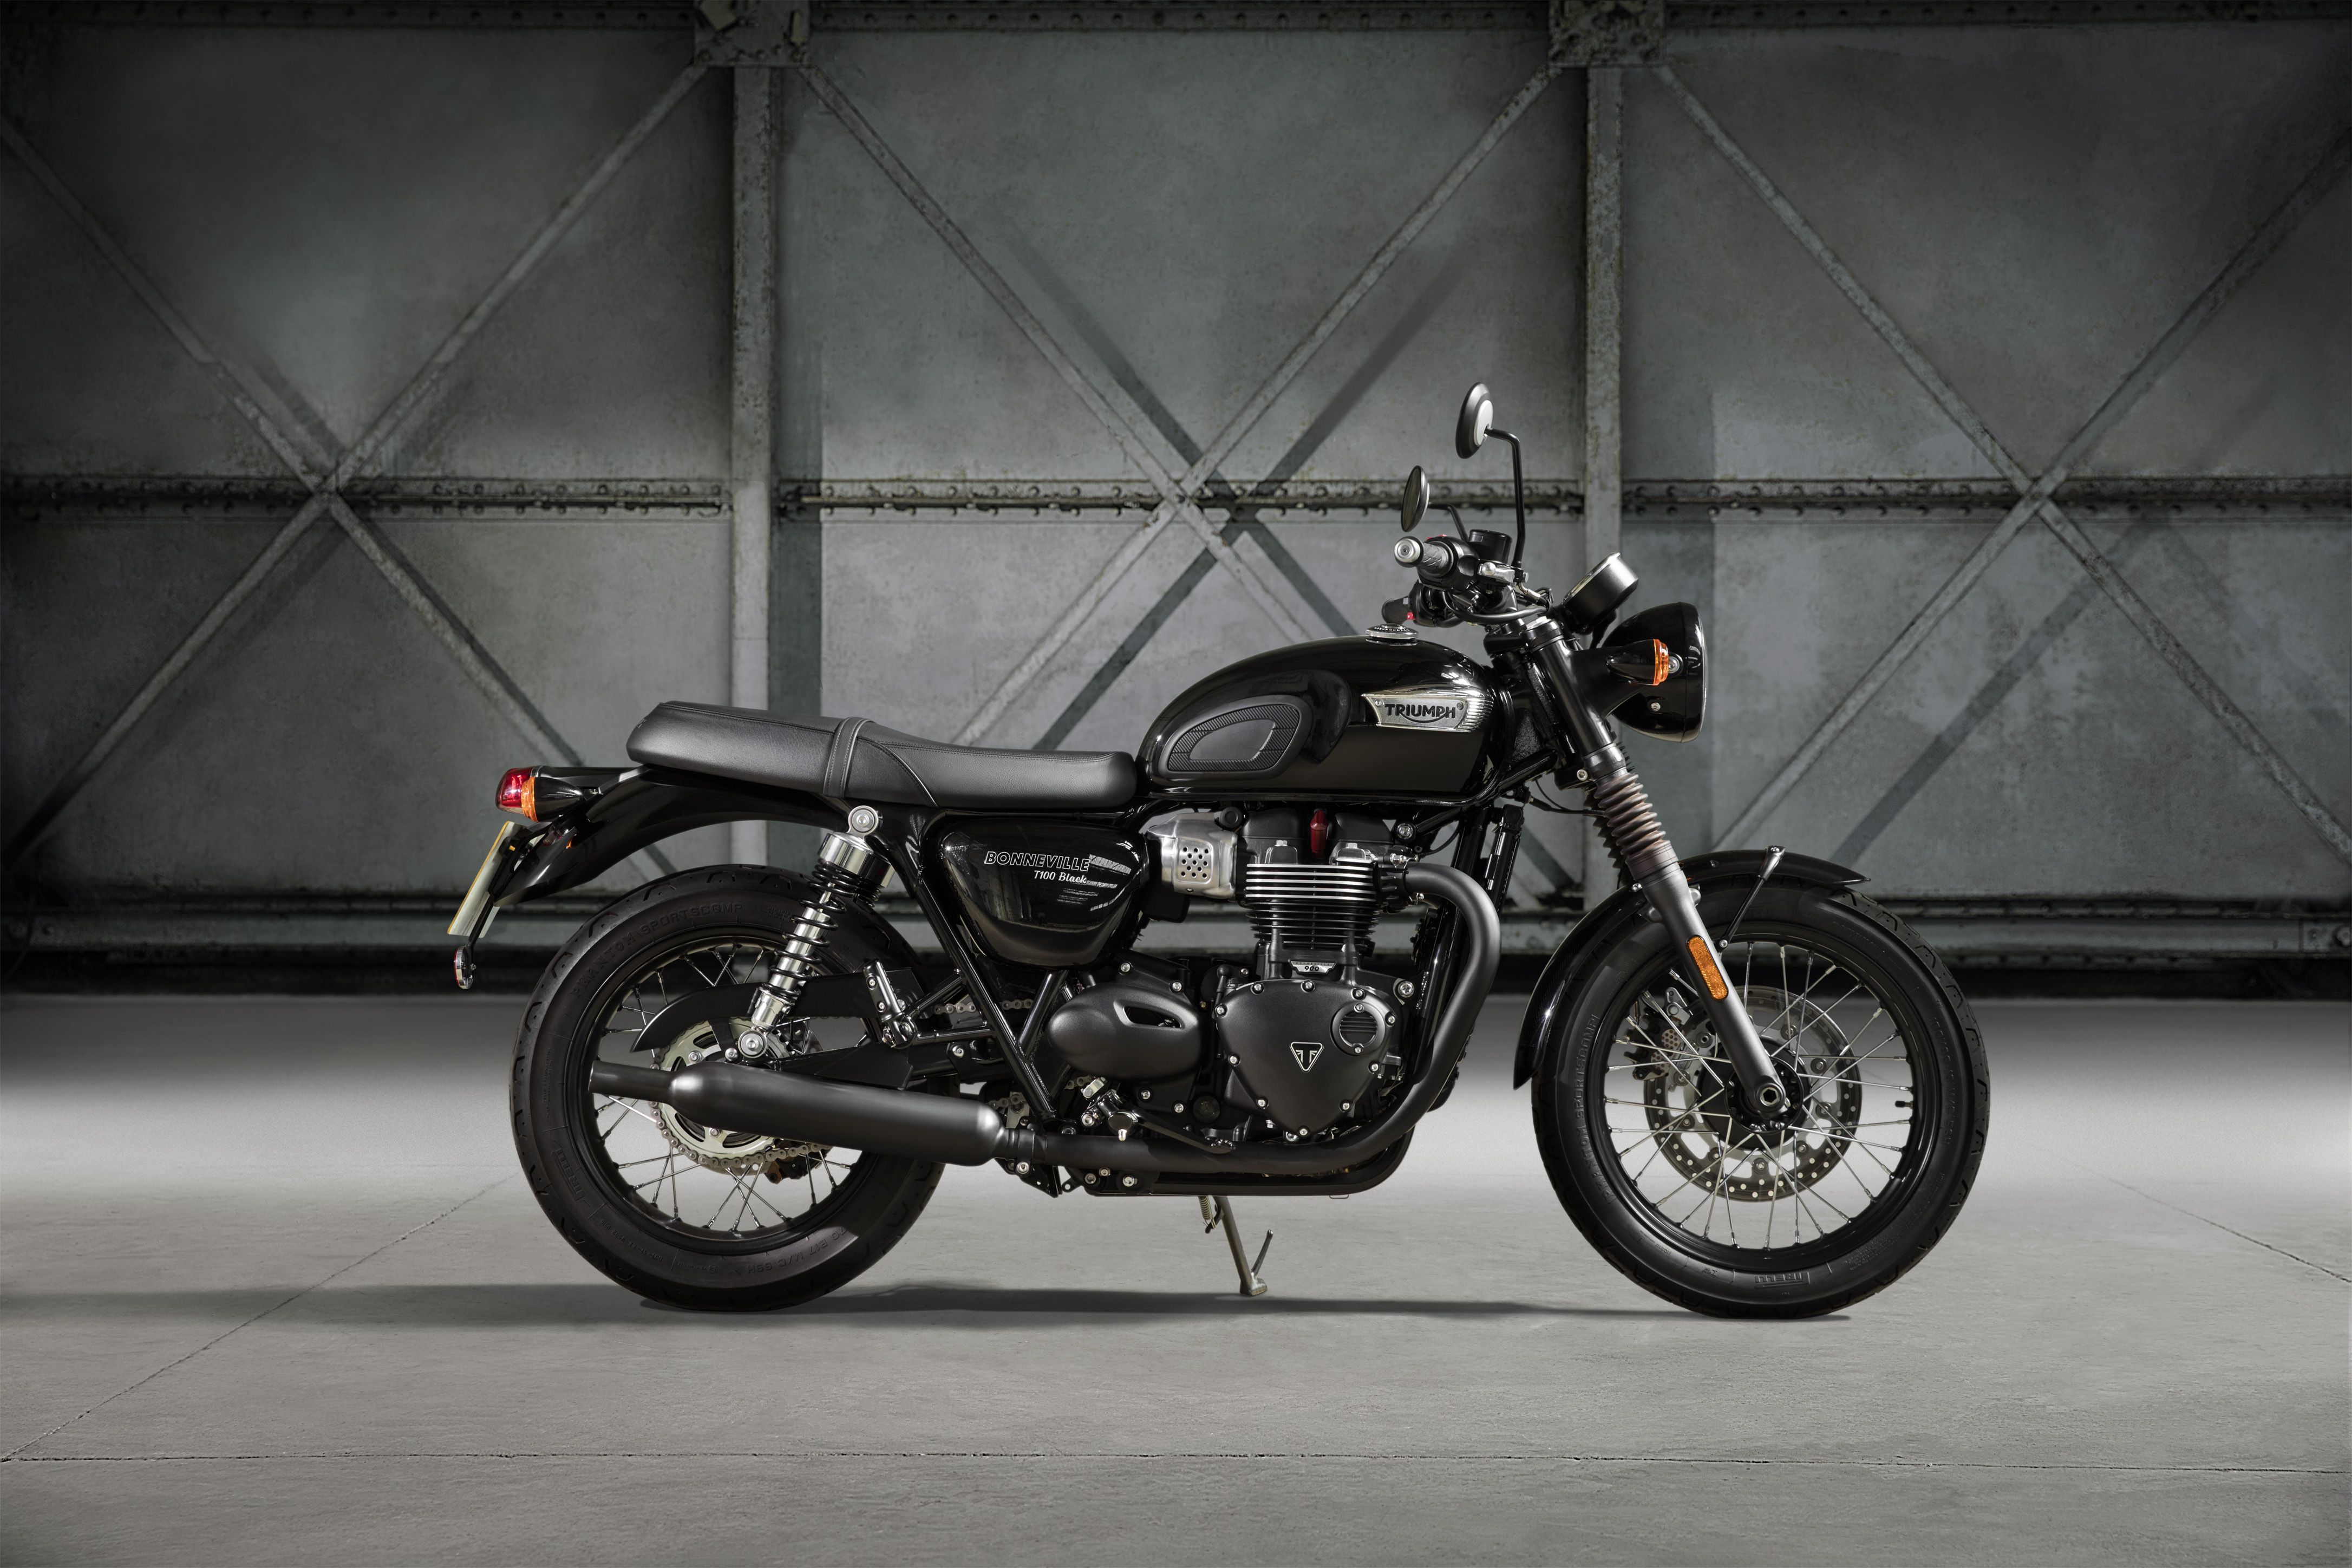 2017 Triumph Bonneville T100 First Ride Motorcycle Review Cycle World